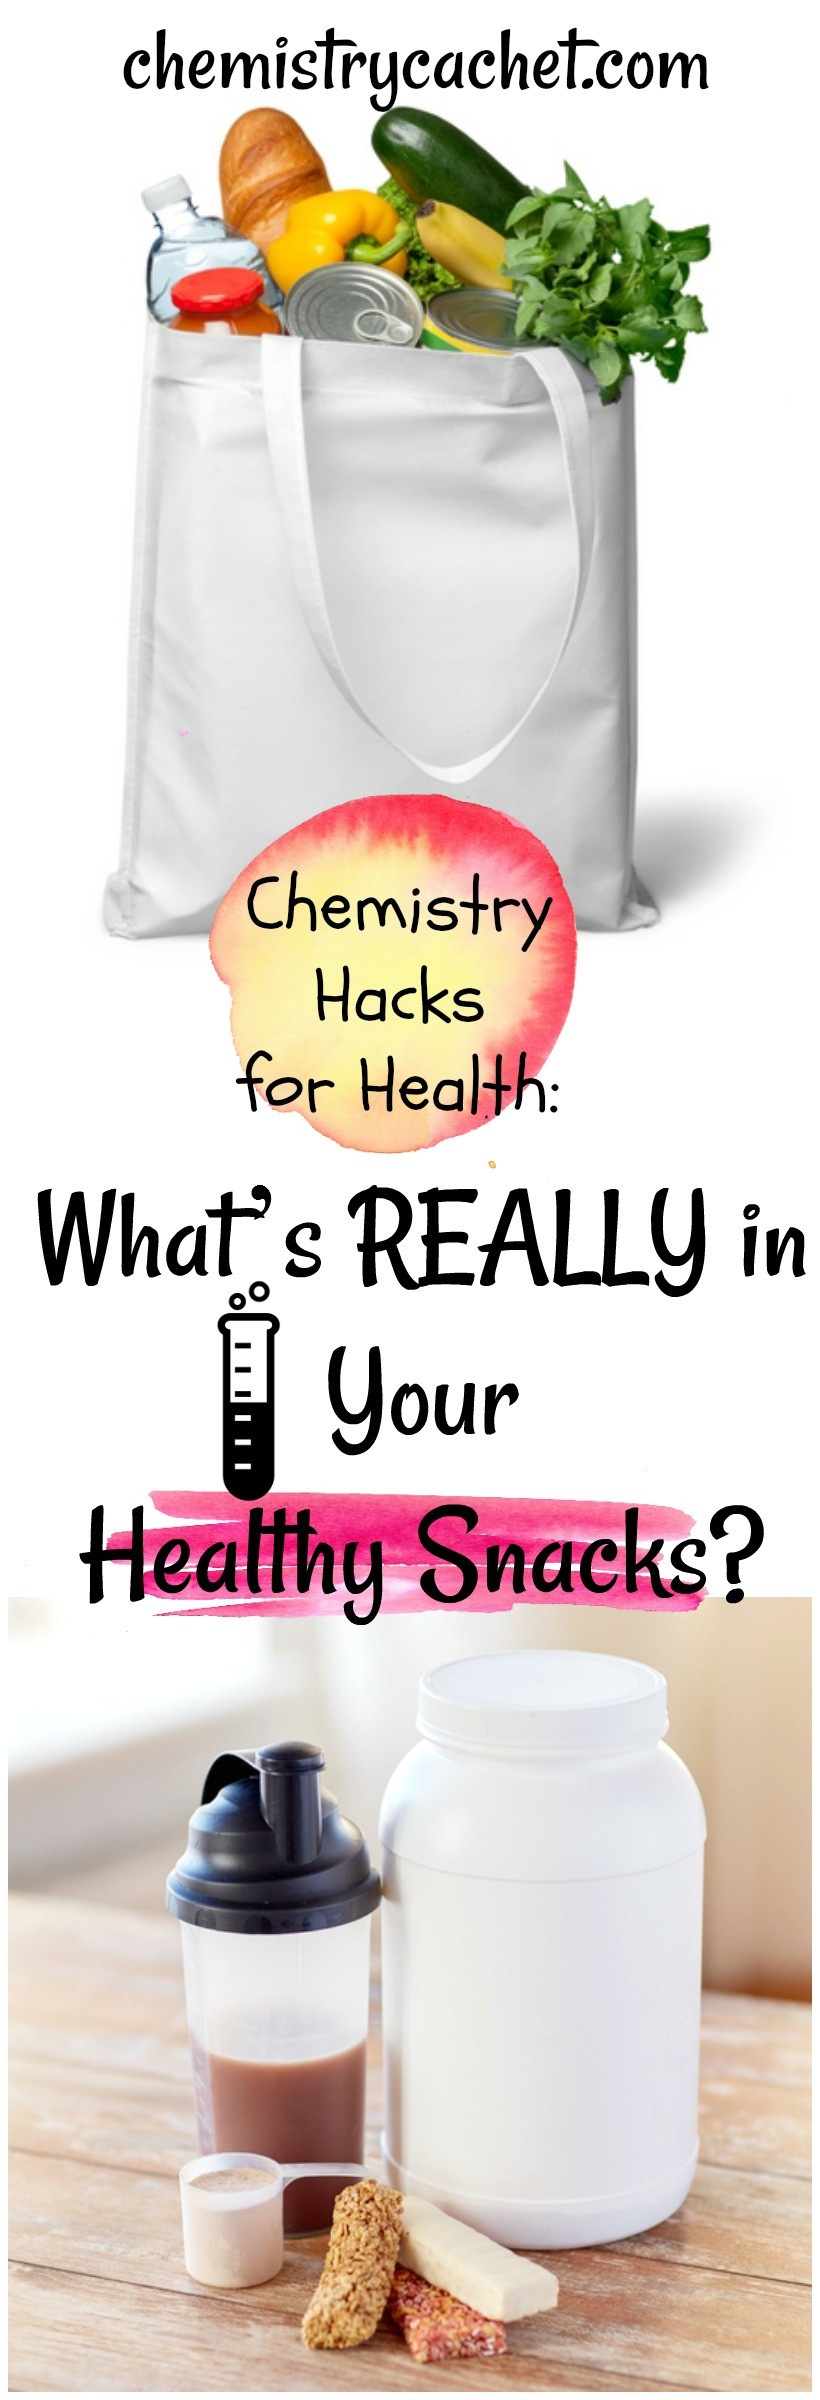 Really Healthy Snacks
 Chemistry Hacks for Health What s Really in Healthy Snacks